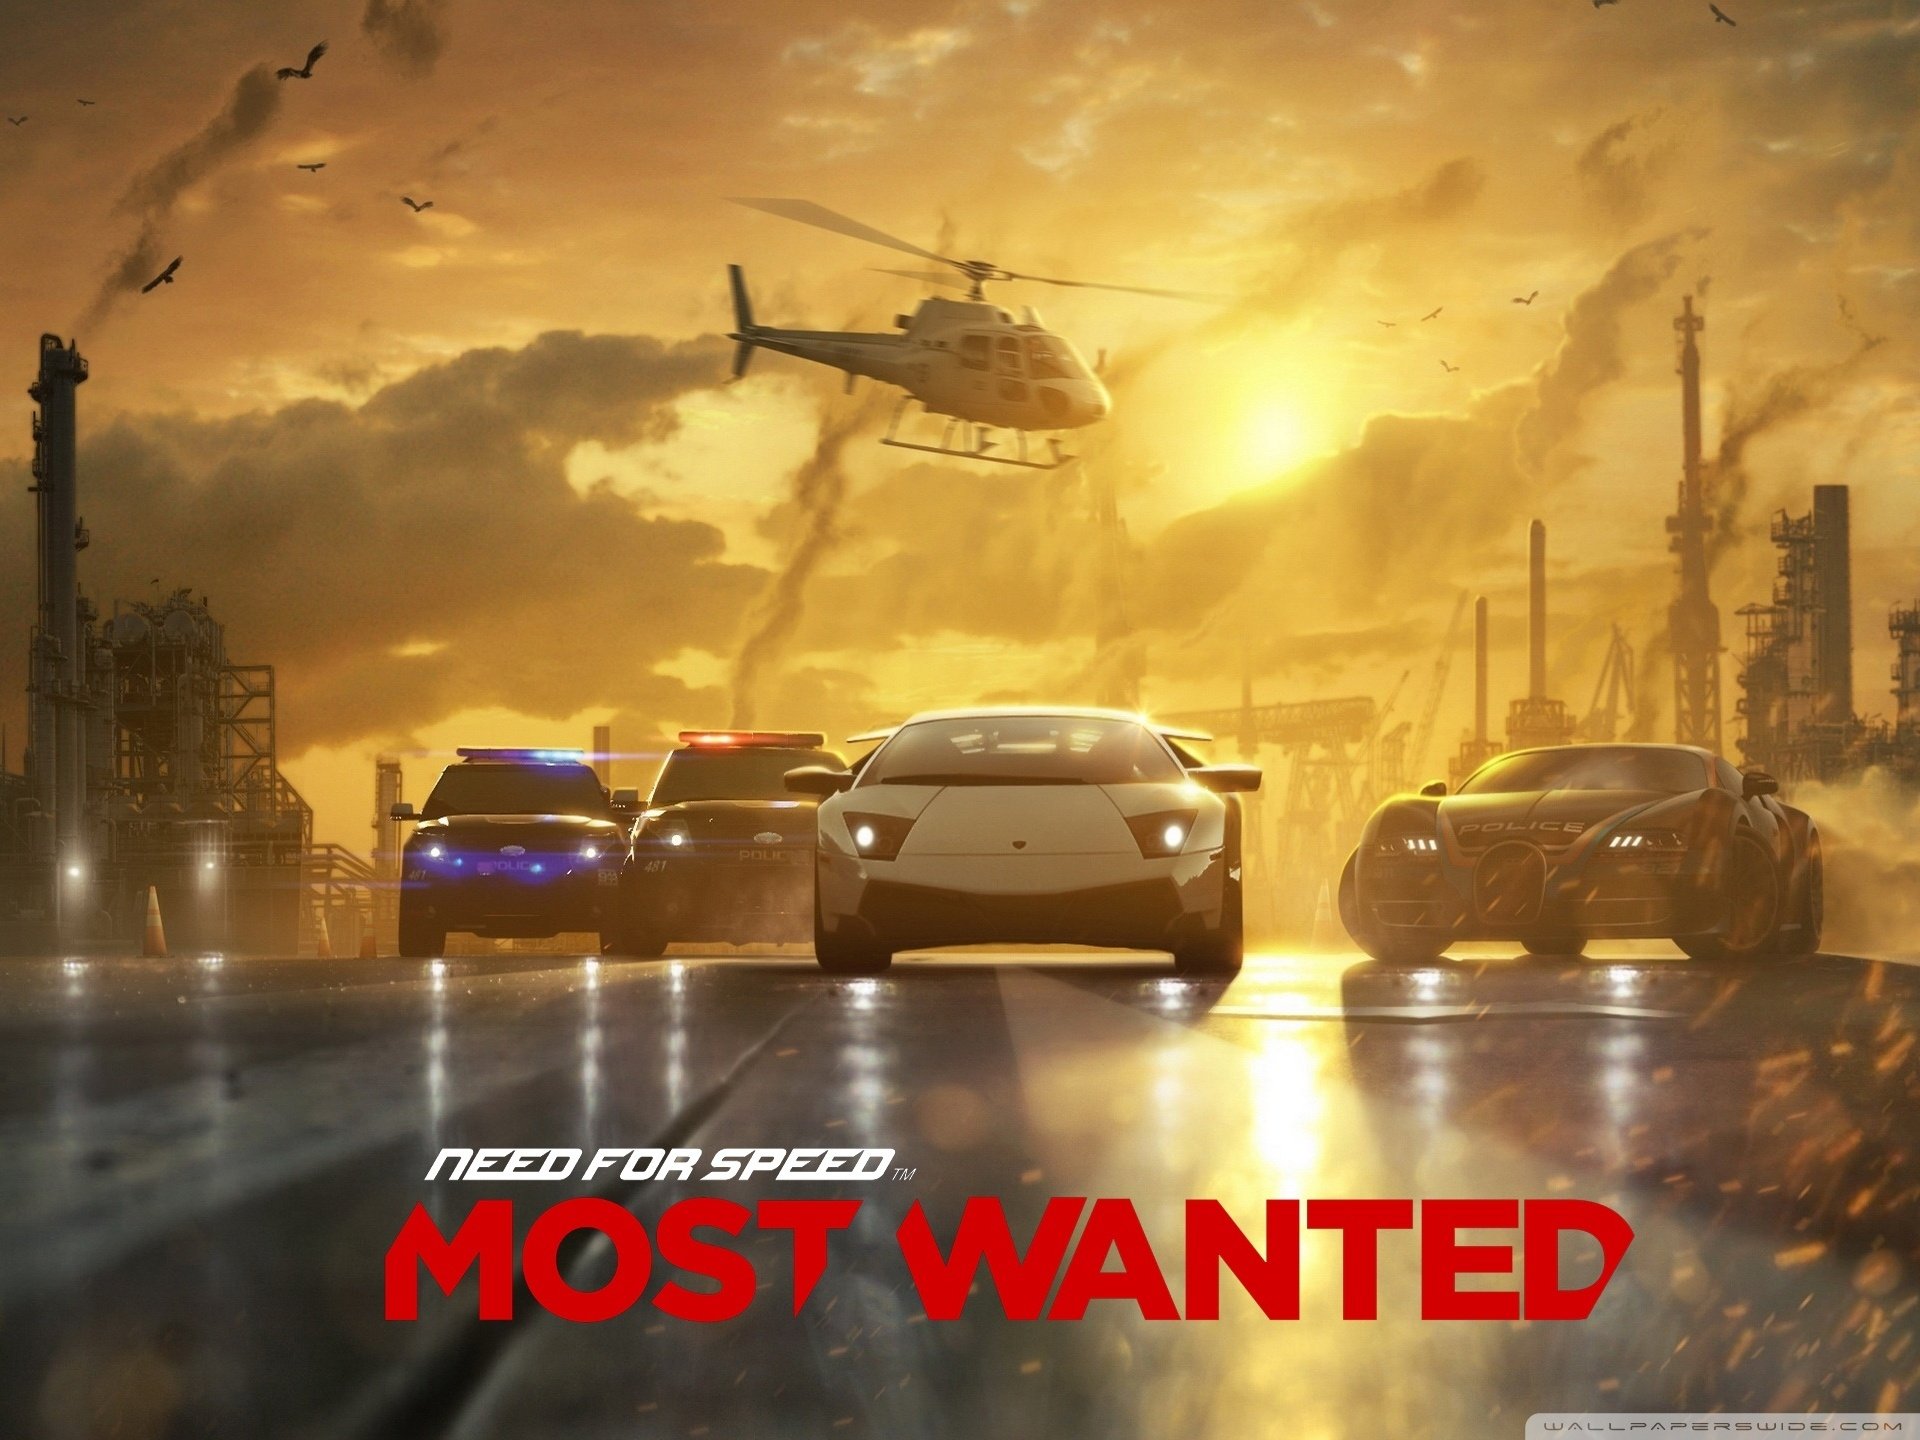 Need for Speed Most Wanted 2012 Ultra HD Desktop Background Wallpaper for: Widescreen & UltraWide Desktop & Laptop, Multi Display, Dual Monitor, Tablet